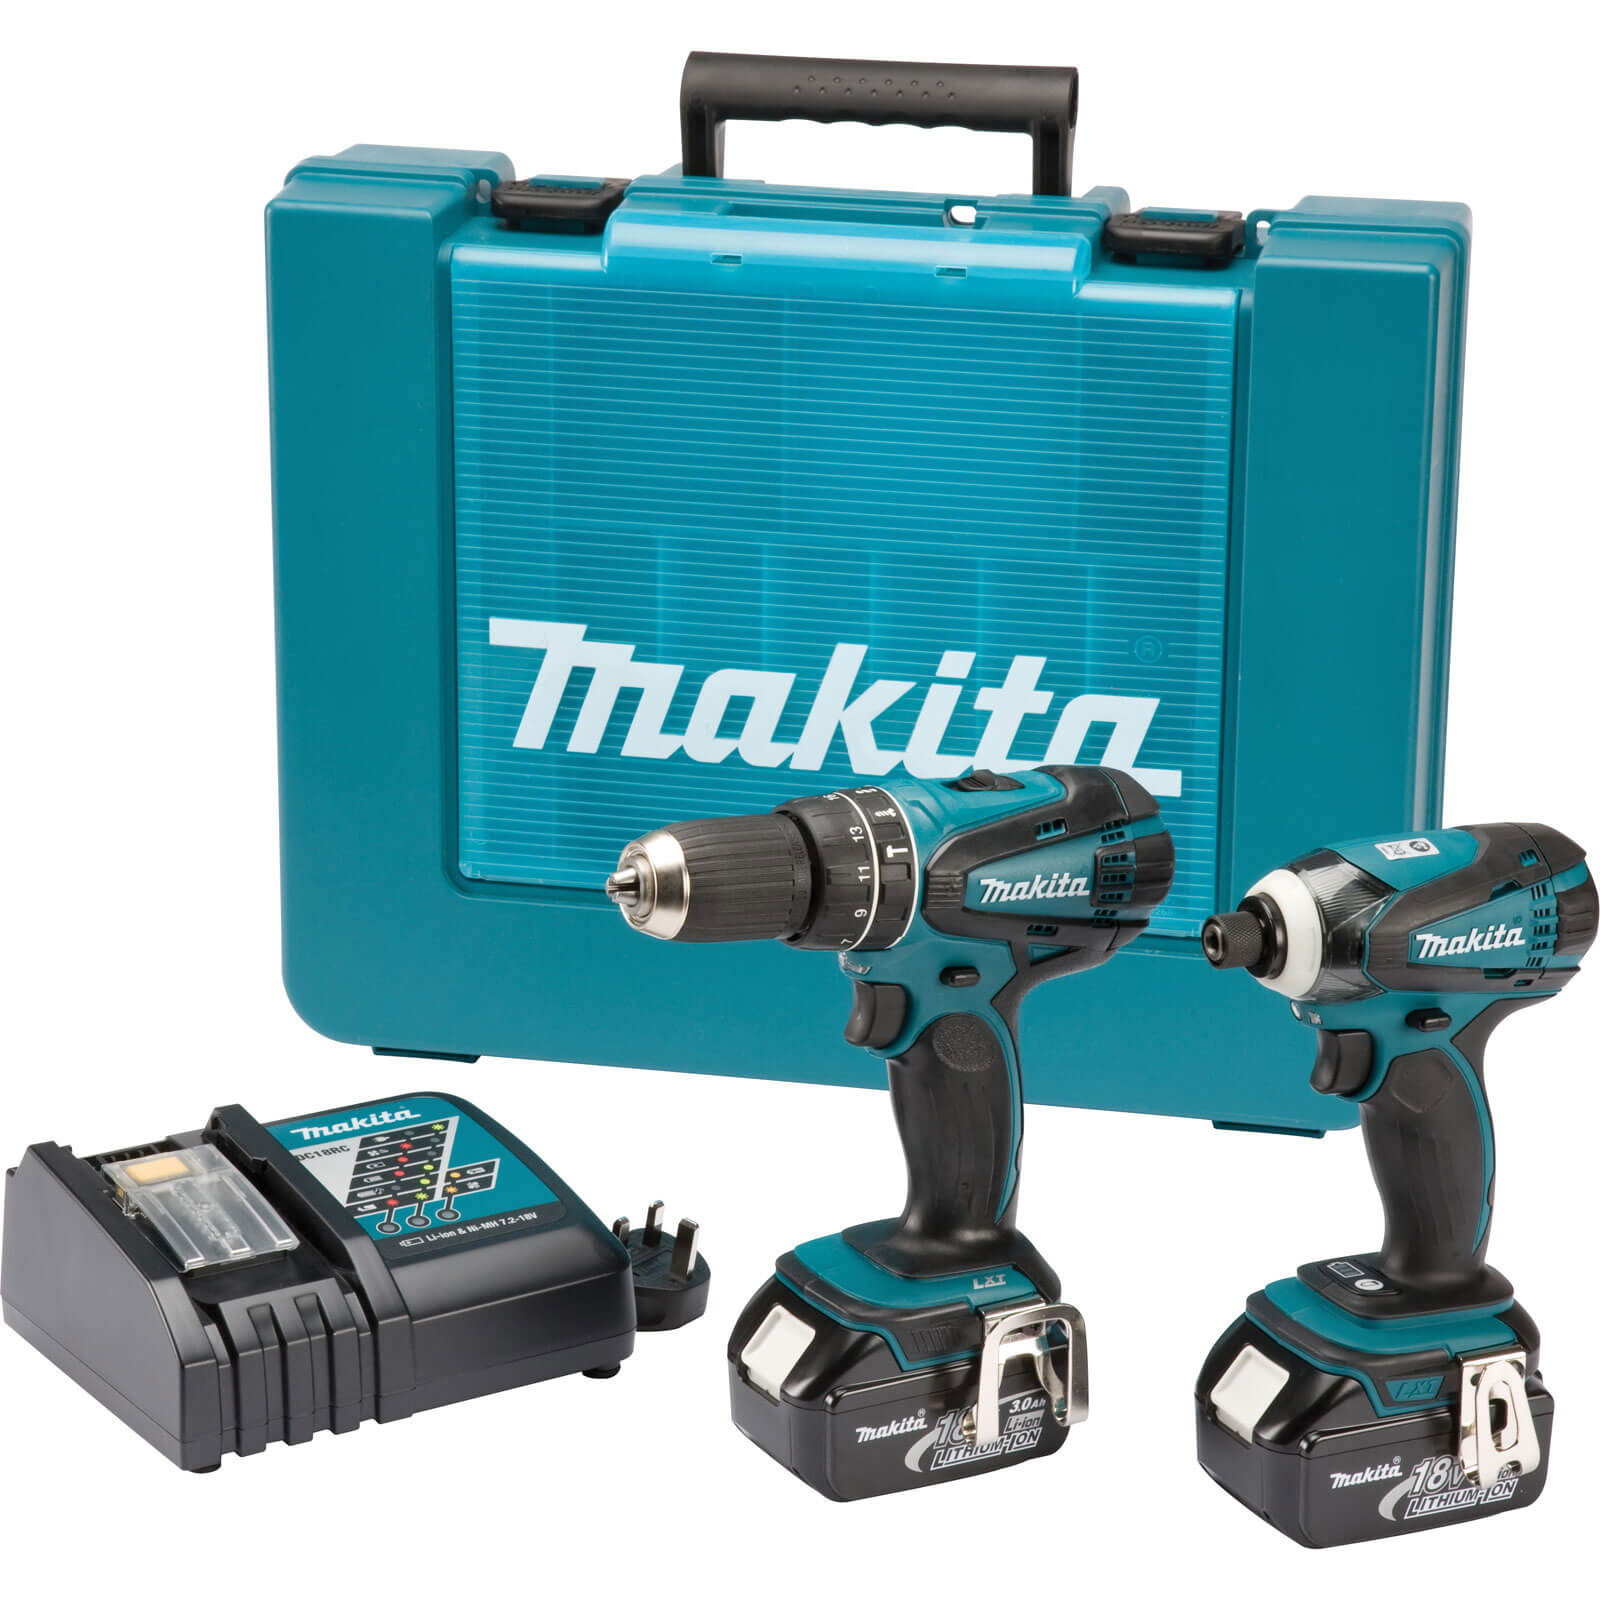 Makita DLX2012 18v Cordless Brushless Combi Drill & Impact Driver with 2 Lithium Ion Batteries 3ah